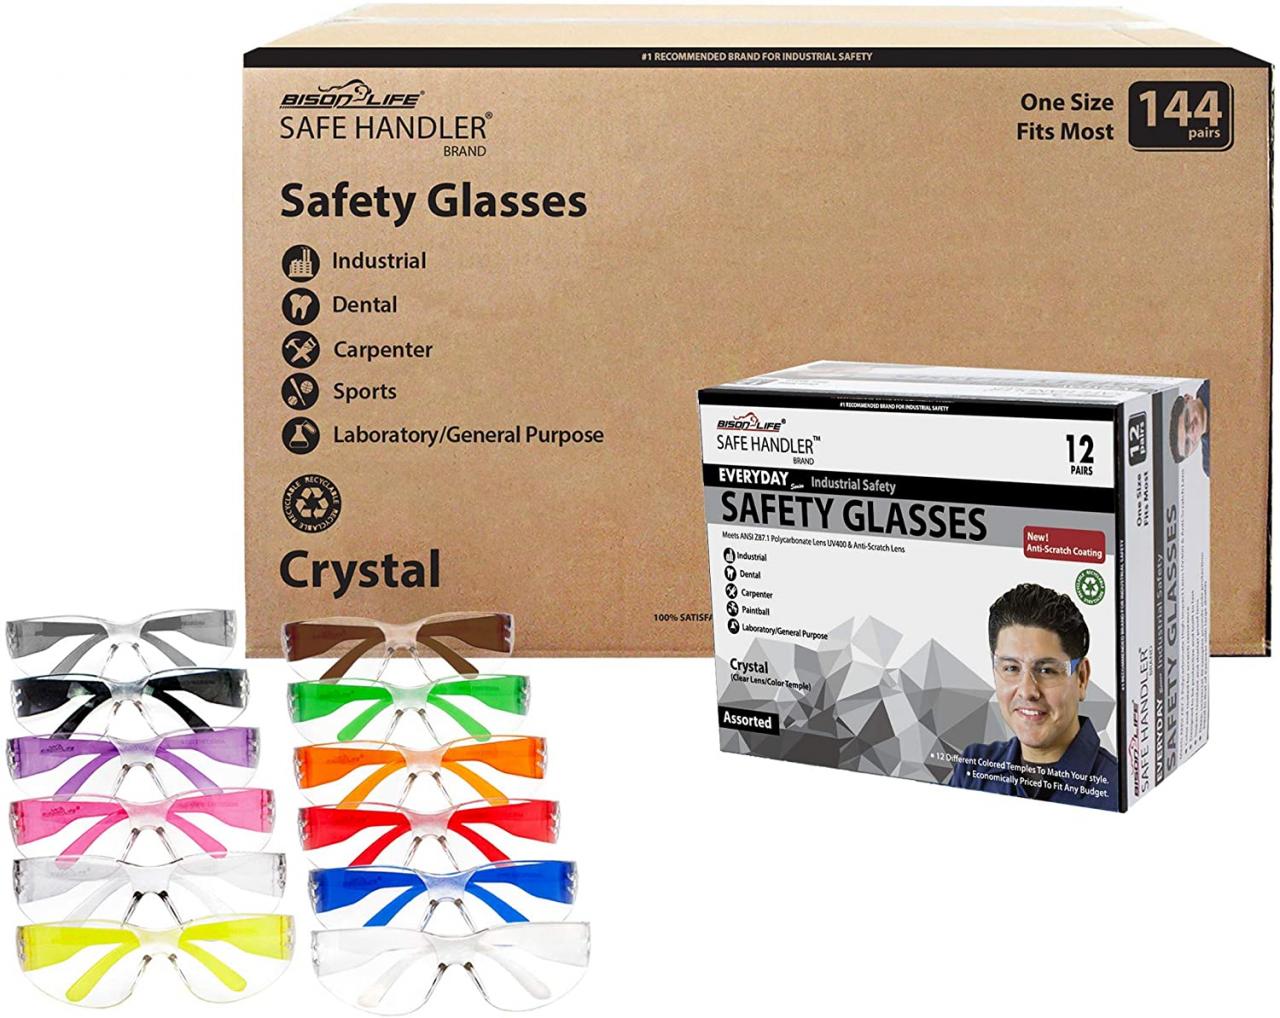 Buy BISON LIFE Clear Lens Color Temple Safety Glasses | One Size, Adult,  Teen, Youth, Clear Protective Polycarbonate Lens Color Temple, 12 Color  VARIETY, Case of 12 BOXES, 144 PAIRS Online in Taiwan. B07H8NTRS2